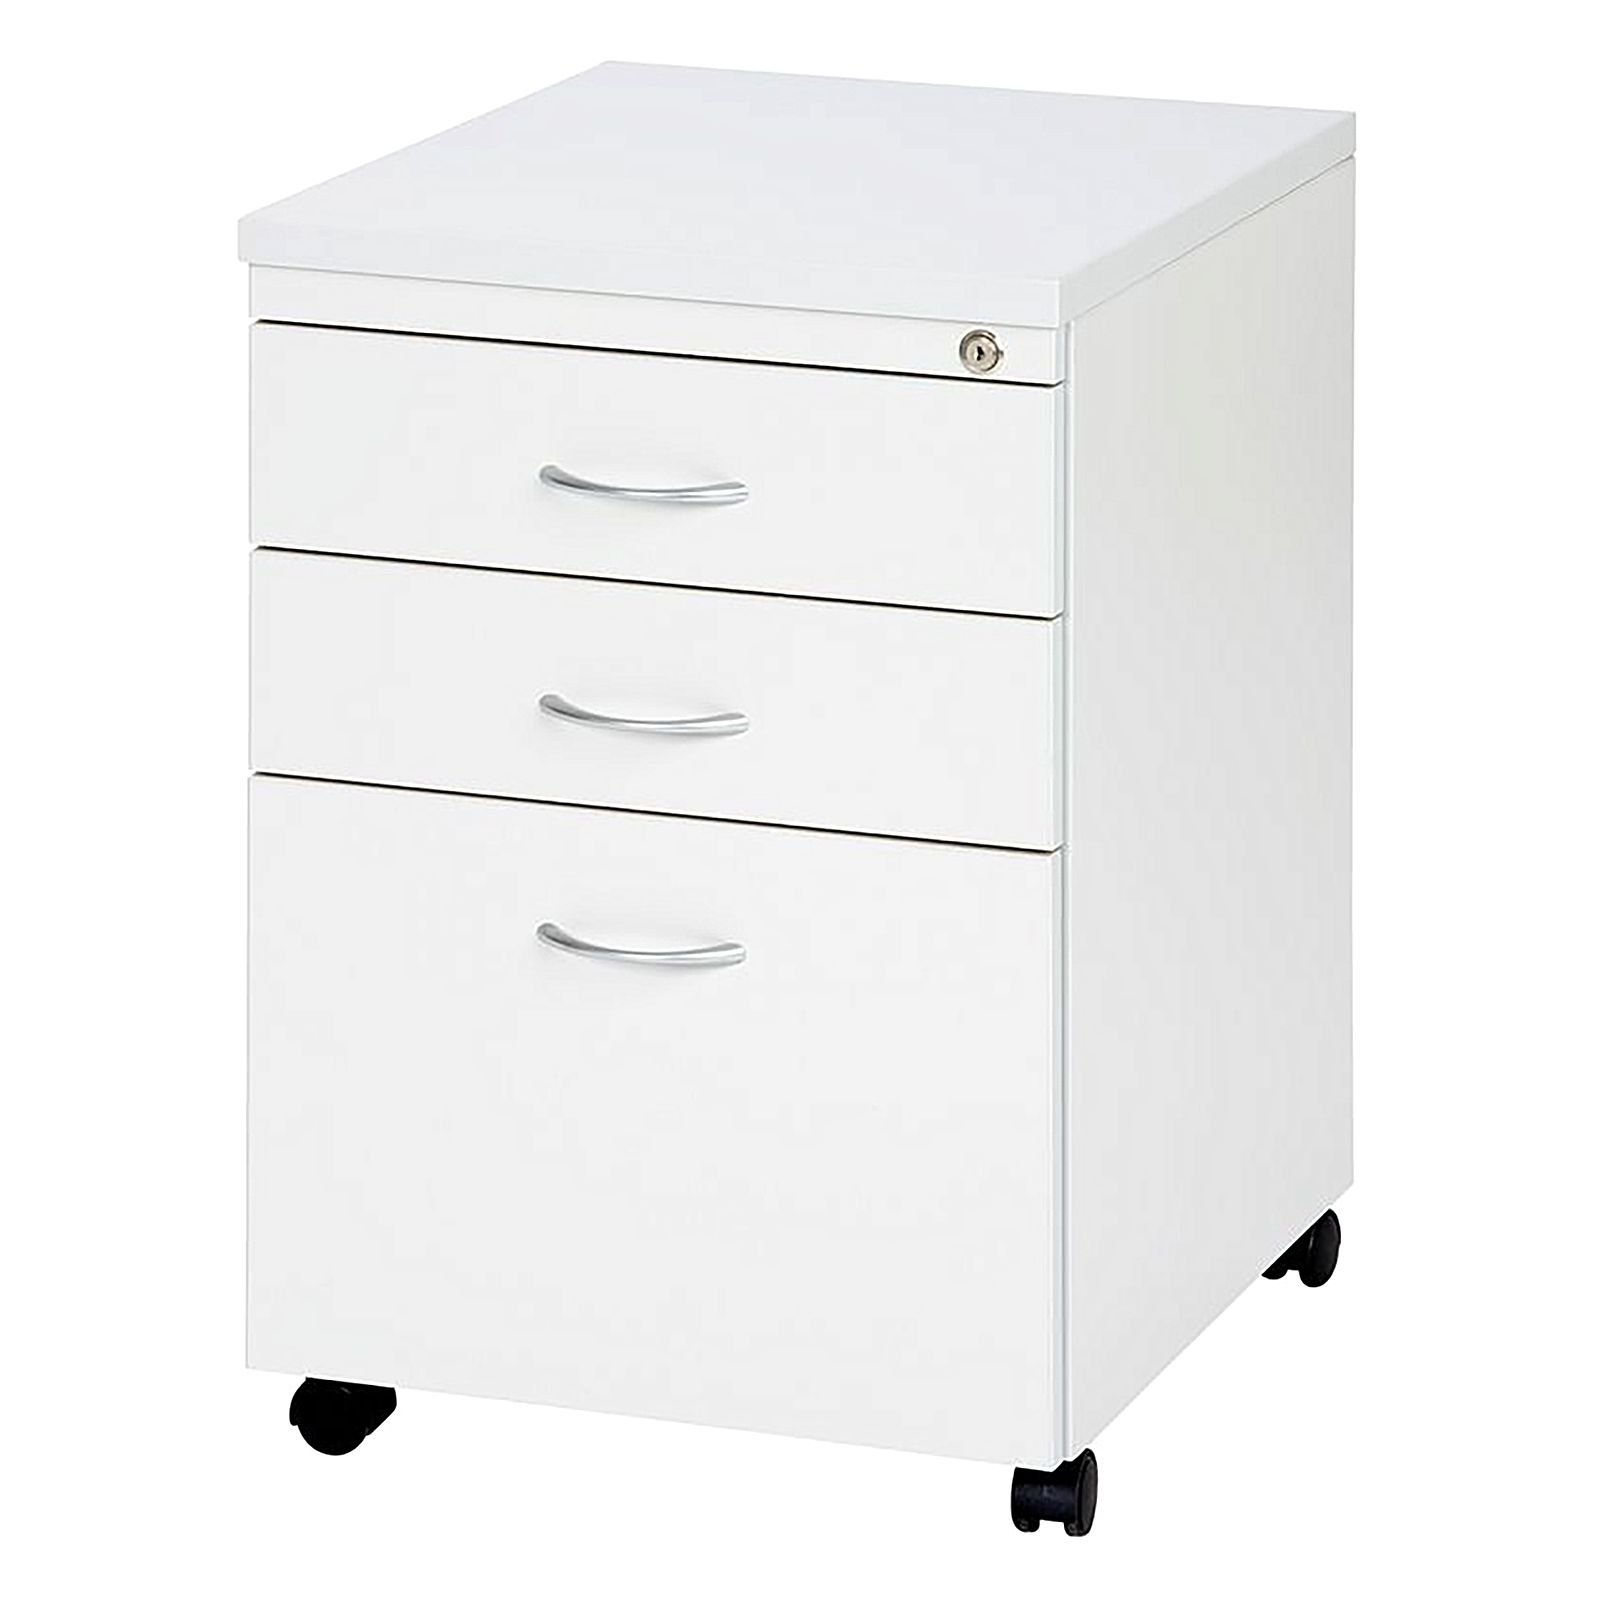 Velocity Mobile 3 Drawer Filing Cabinet Velocity Zanui pertaining to measurements 1600 X 1600